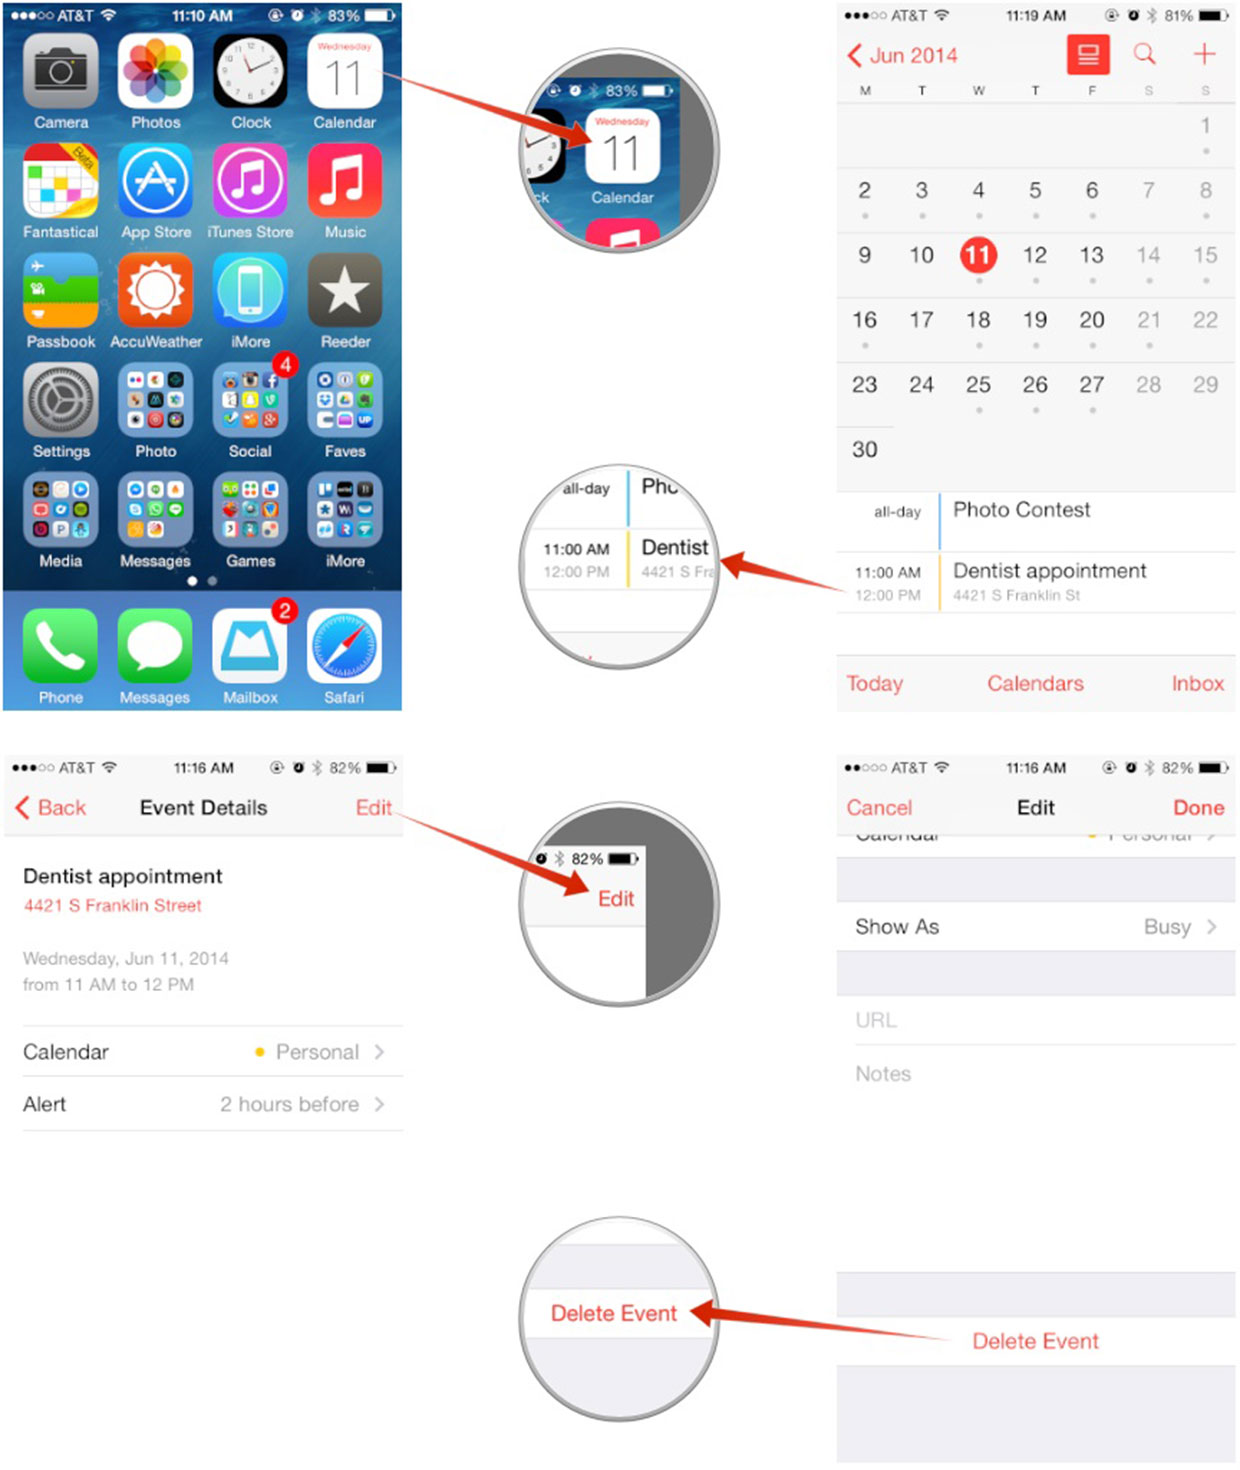 How to create, edit, and delete calendar events on your iPhone or iPad